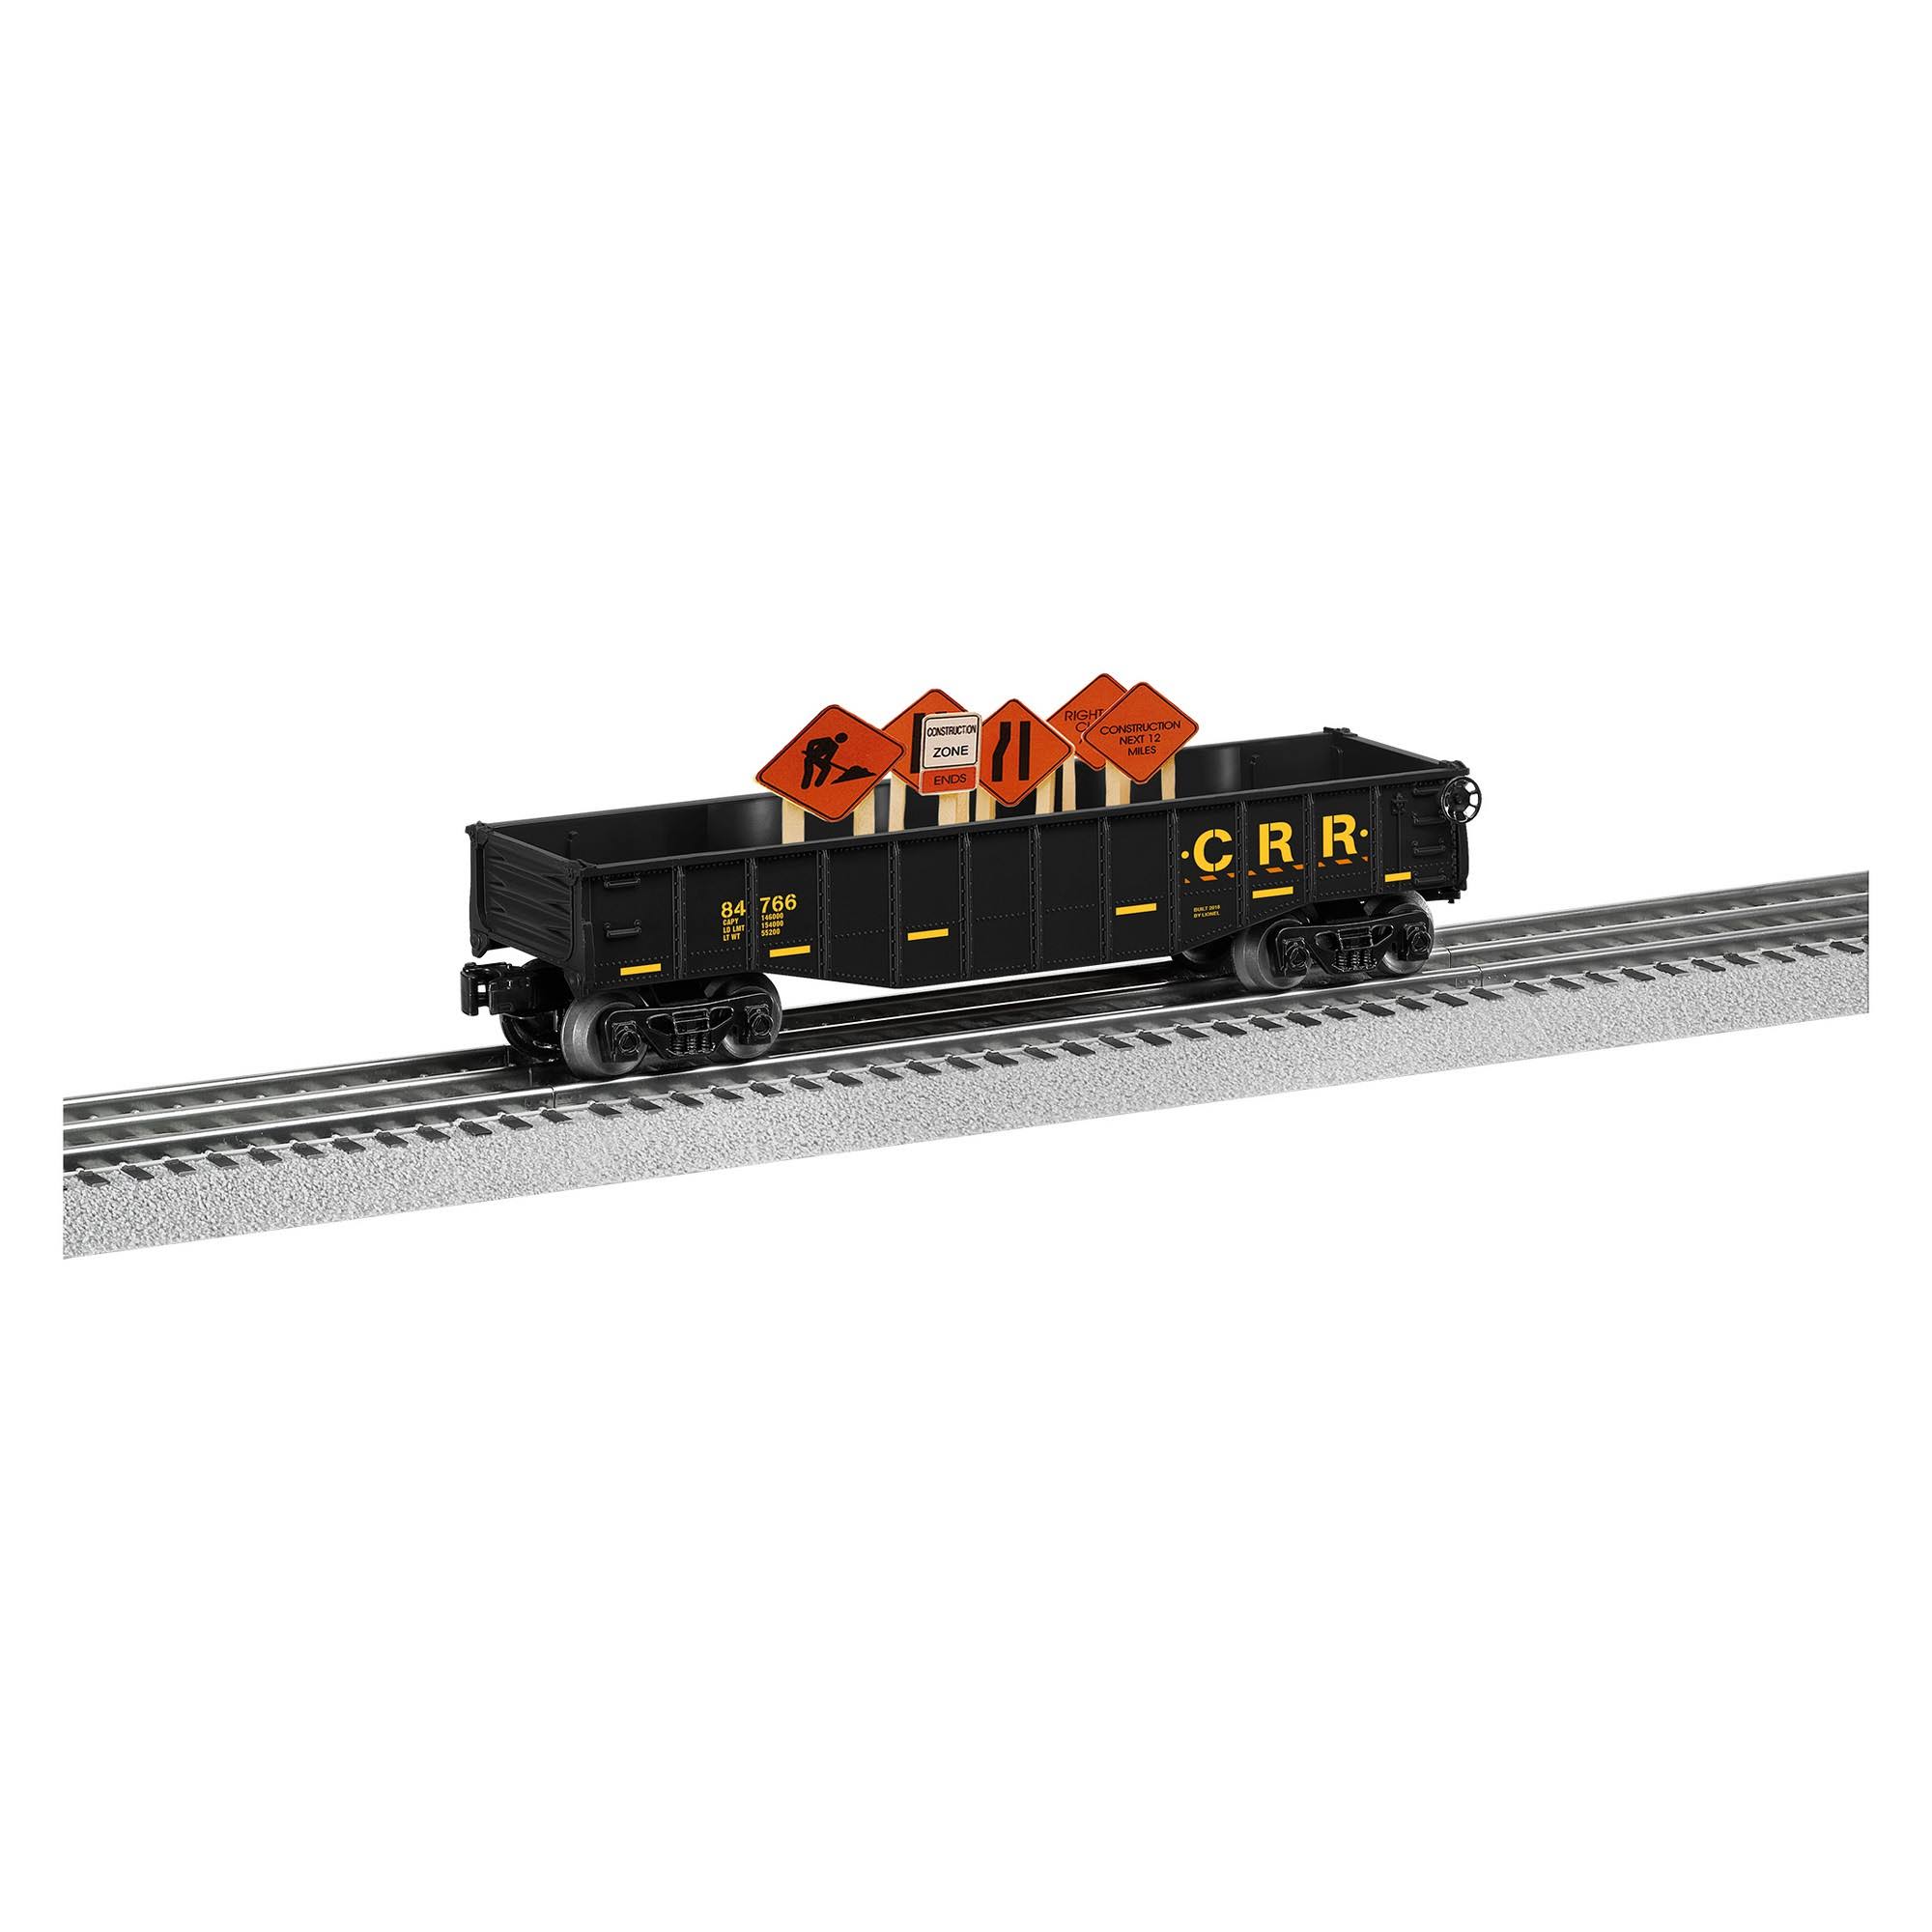 Lionel Trains Gondola With Construction Signs | Lionel | General | 30 Day Money Back Guarantee | Free Shipping On All Orders | Best Price Guarantee